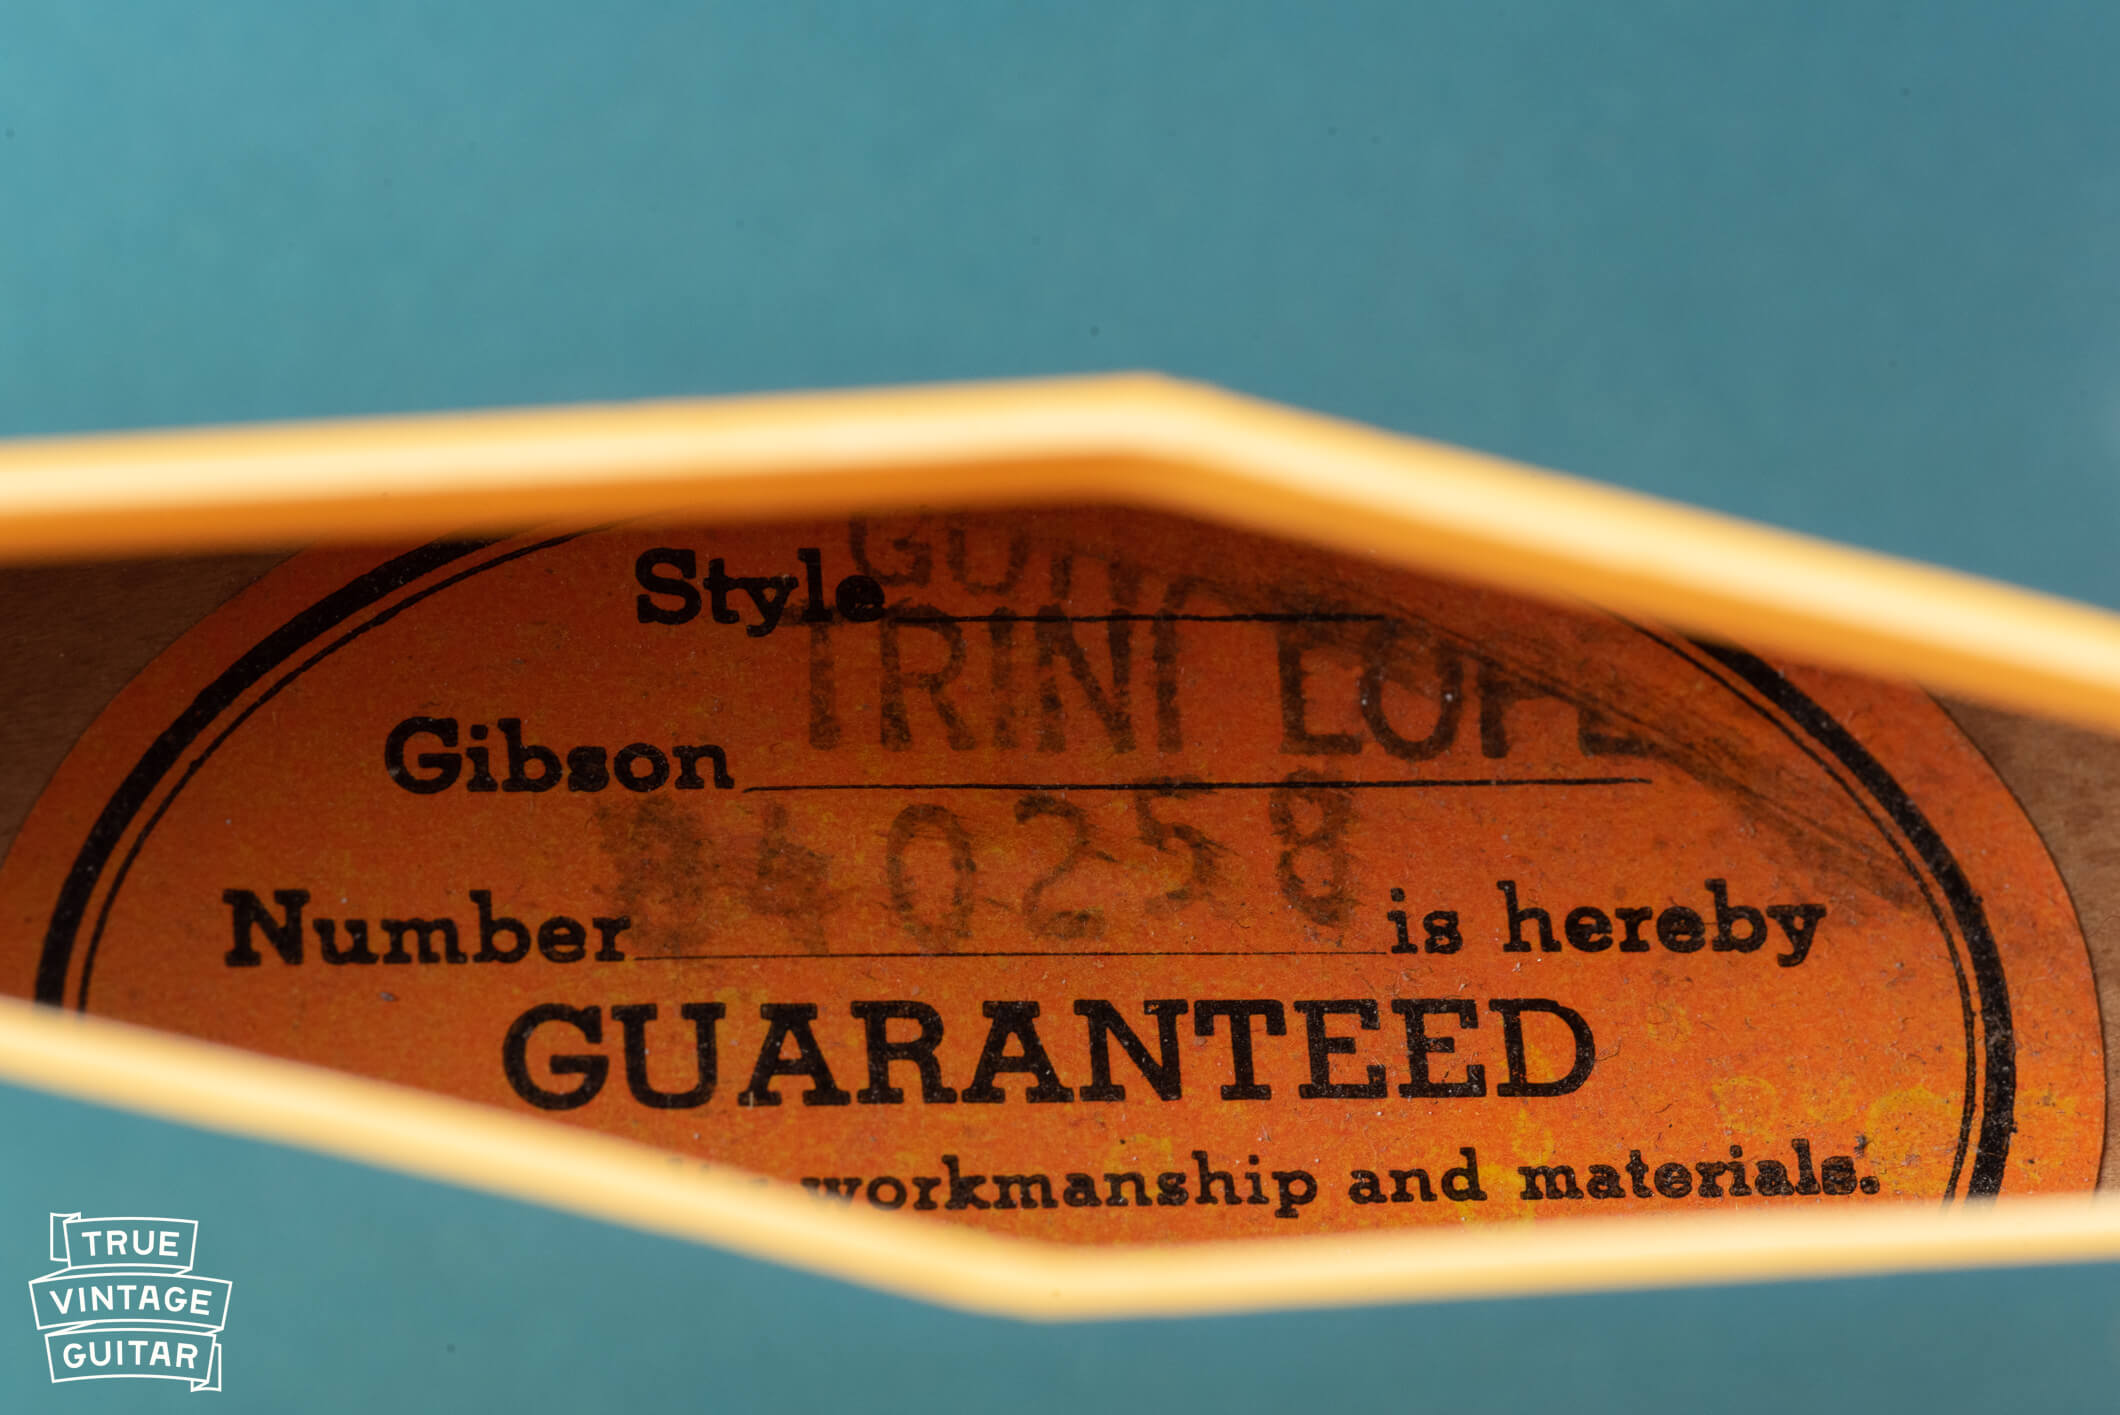 How many Trini Lopez guitars did Gibson make in 1966?